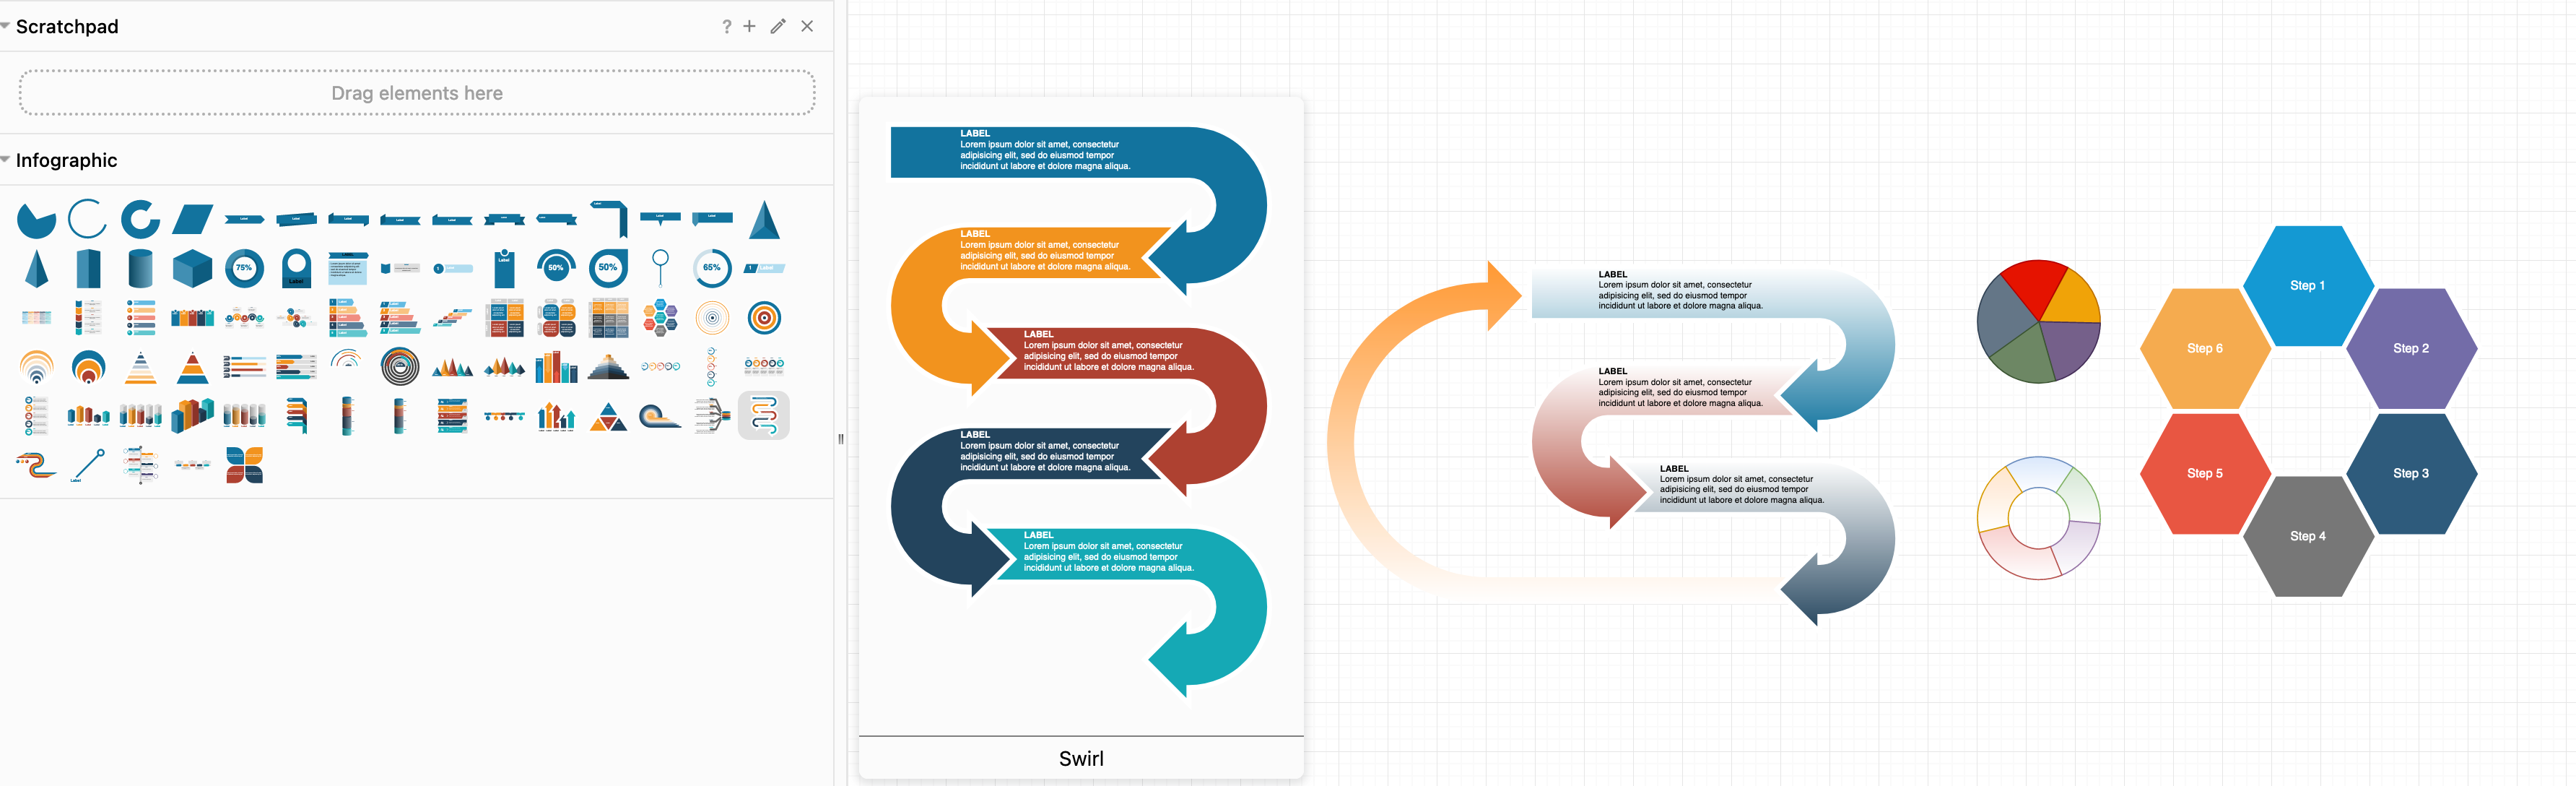 Create your own circular flowchart from shapes in the infographic shape library in draw.io